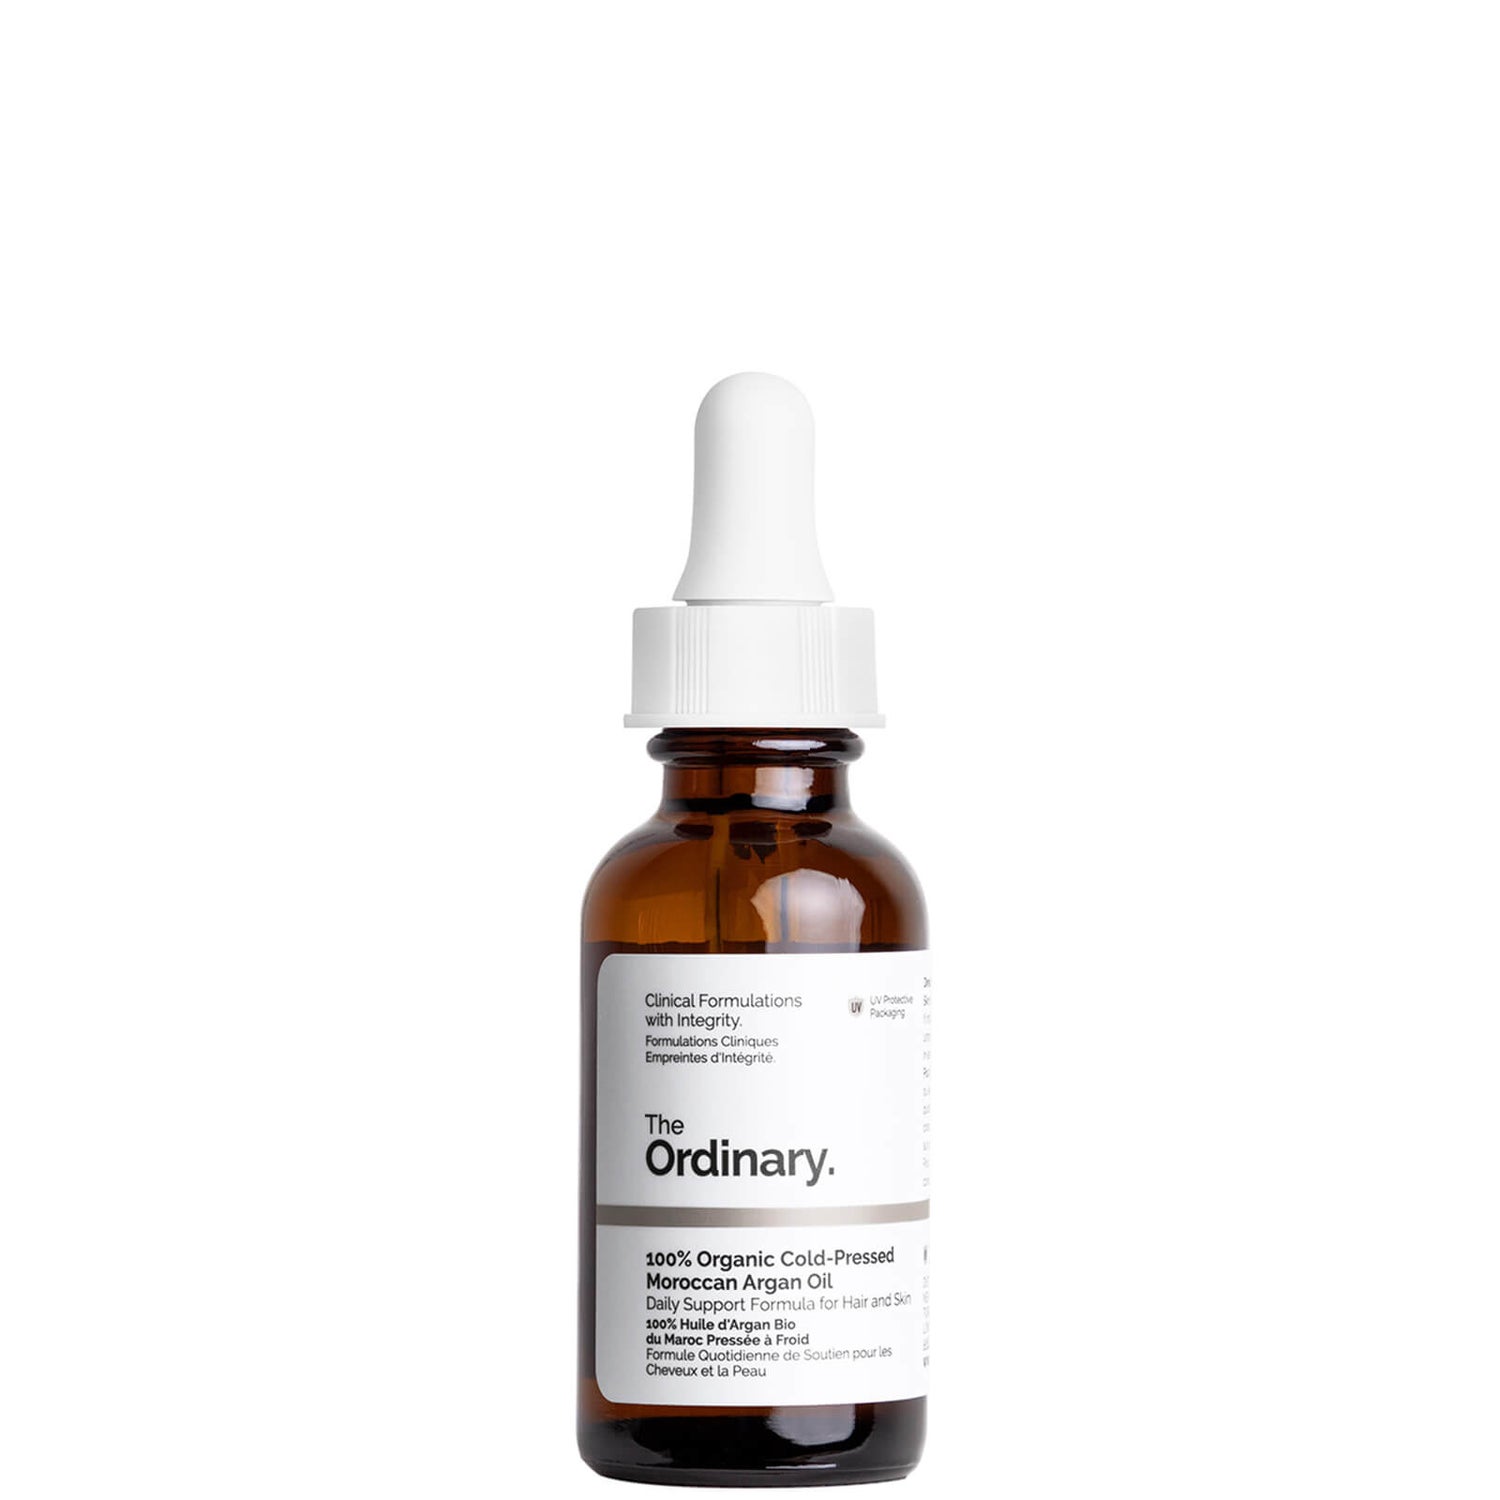 The Ordinary 100% Organic Cold-Pressed Argan Oil 30ml | Cult Beauty